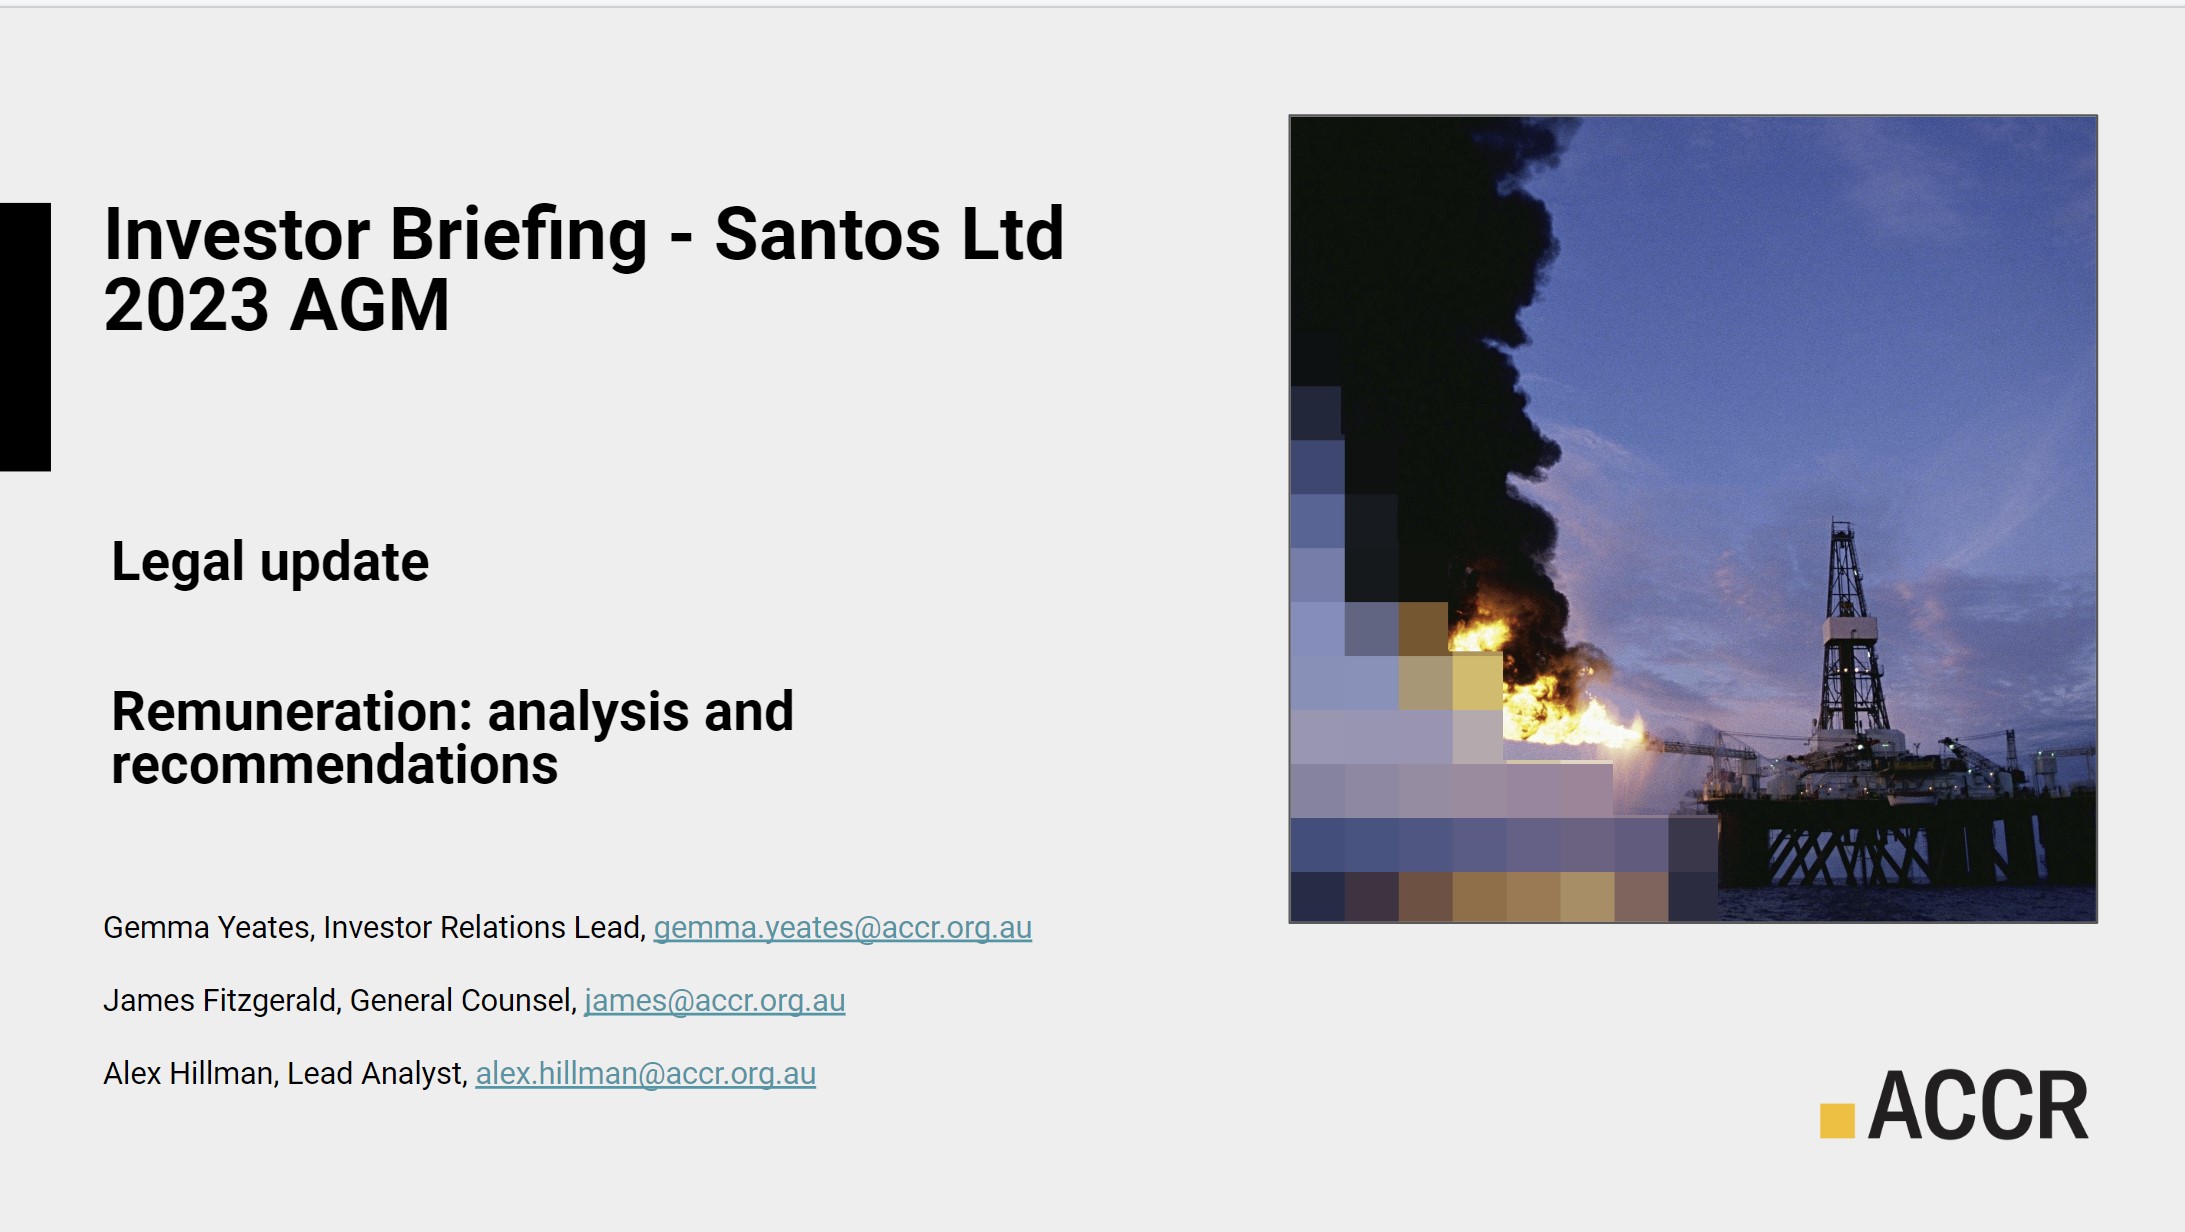 Cover page of the ACCR Presentation on Santos Ltd 2023 AGM publication.